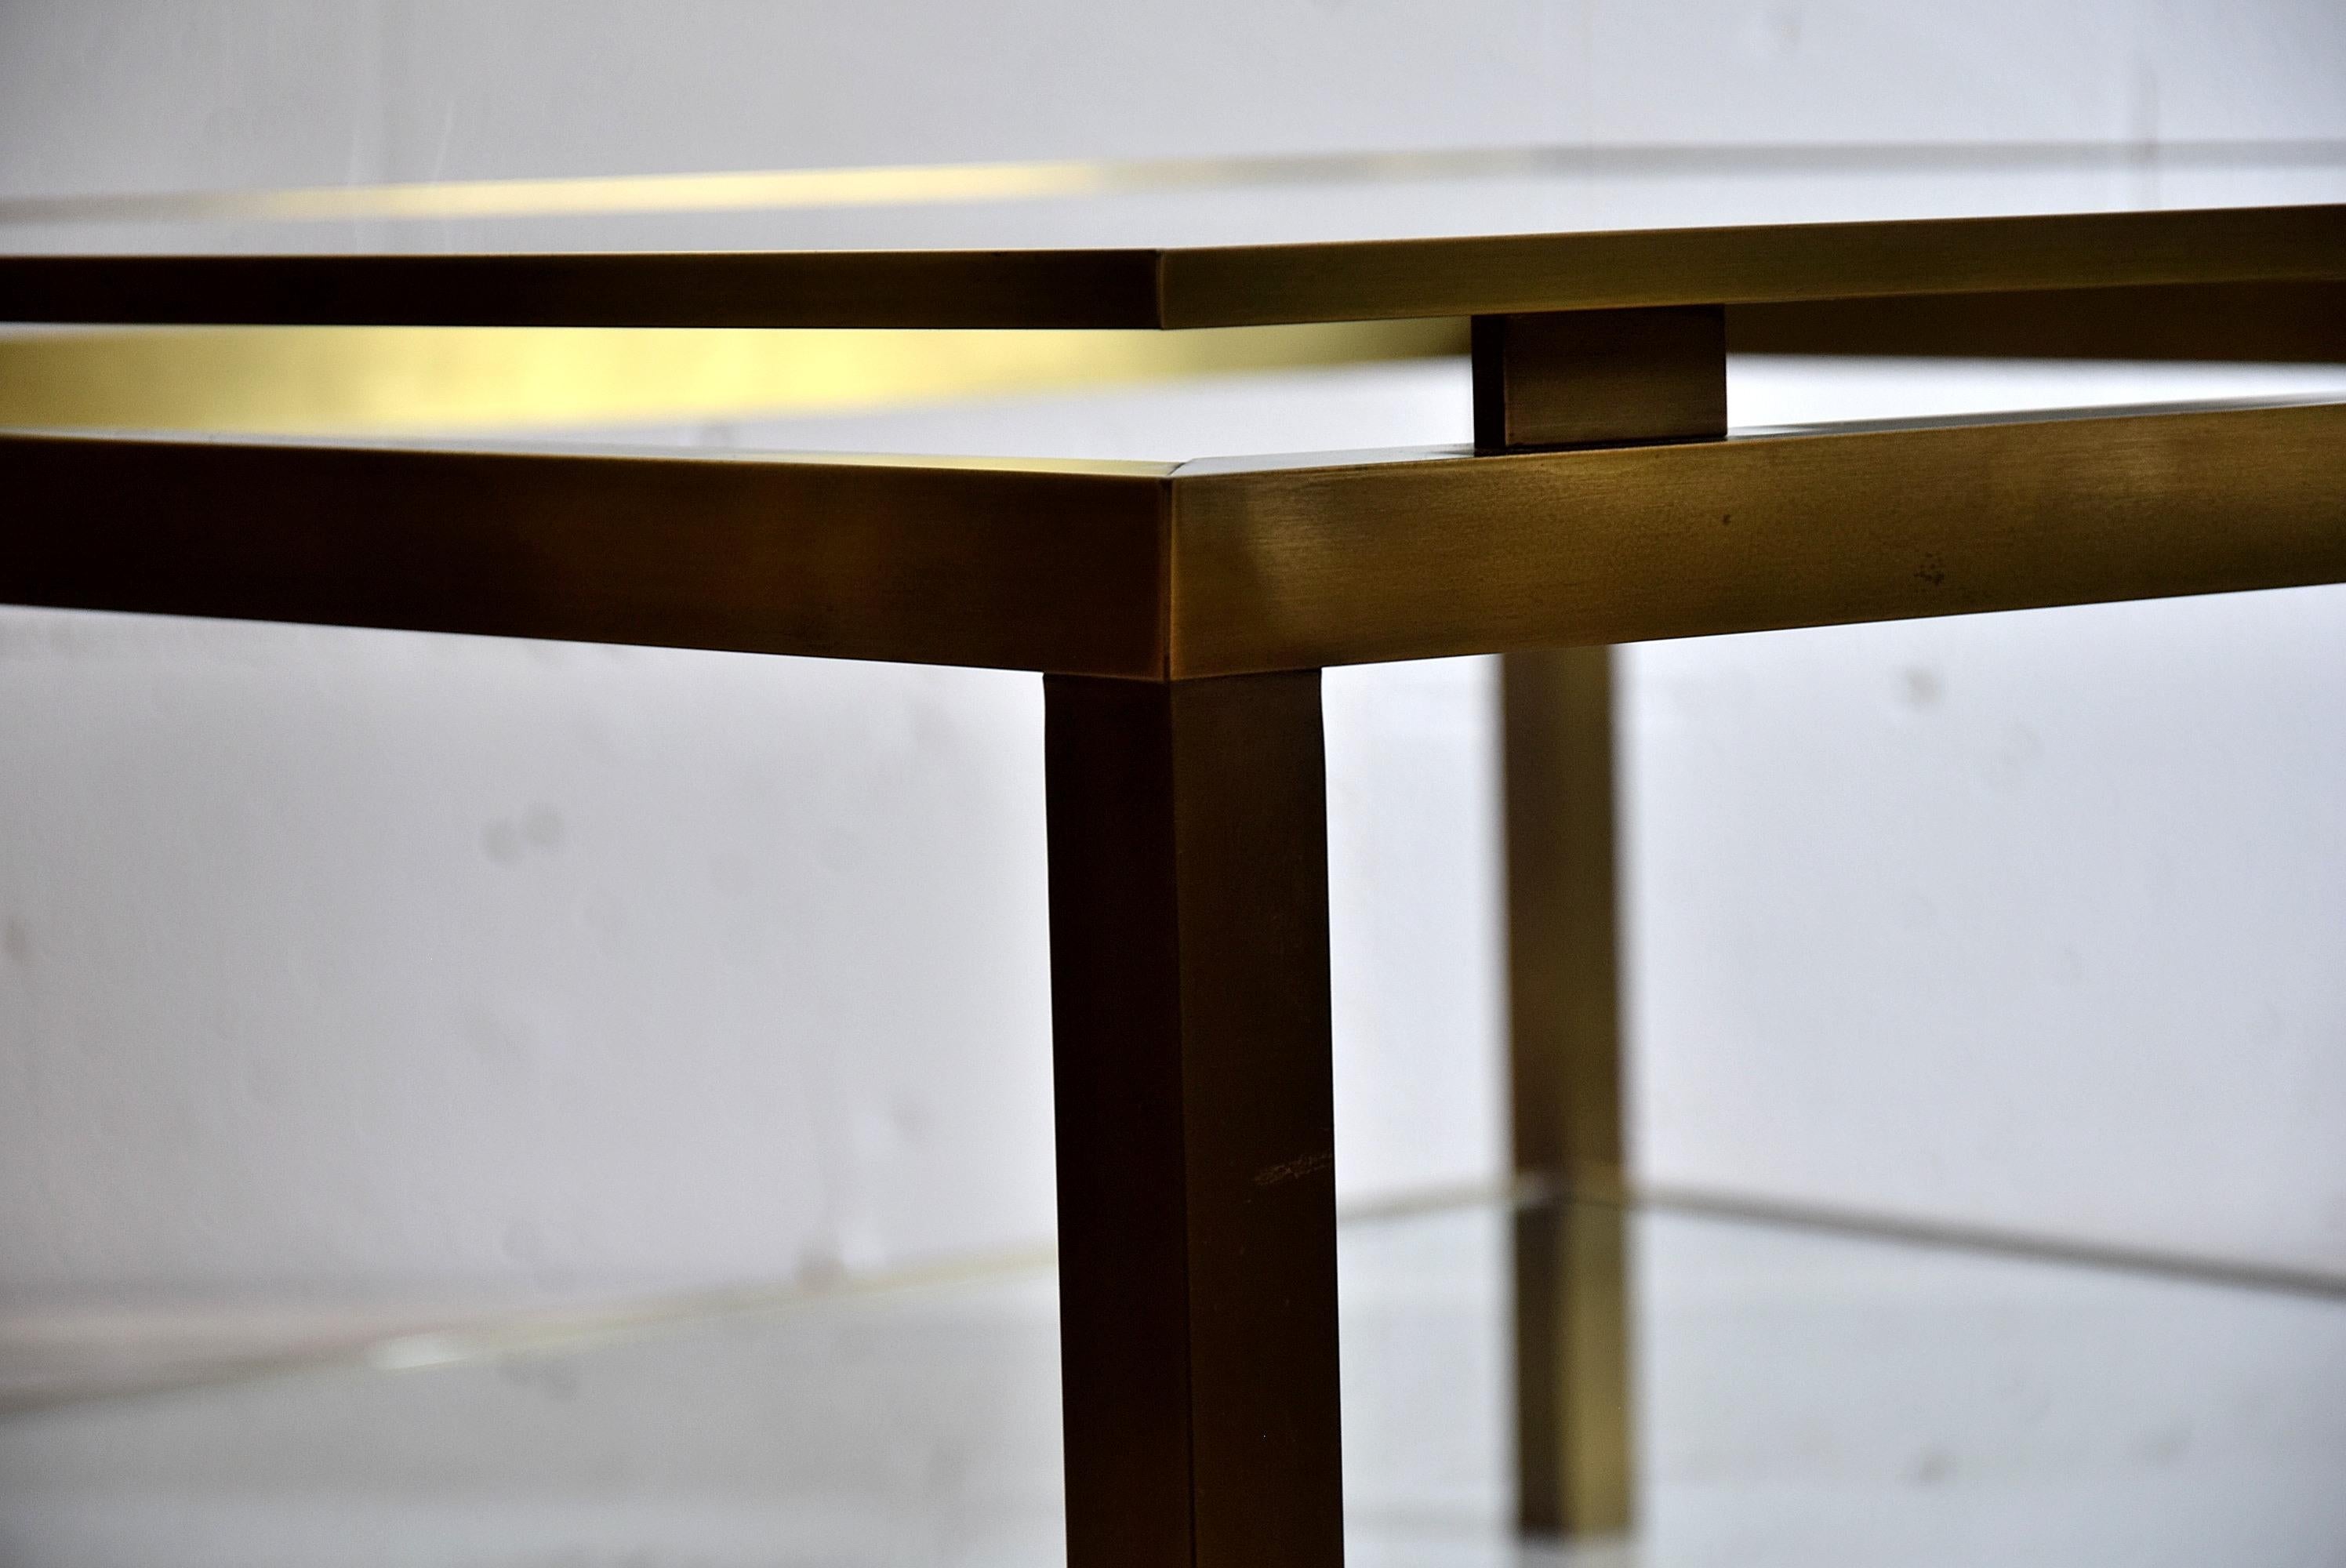 Sophisticated Hollywood Regency brass two tier coffee table in great condition and produced in France in the 1970s.
Both the glass top and bottom have a tiny chip of the glass in one of the corners as can be seen in the images.
The table will be